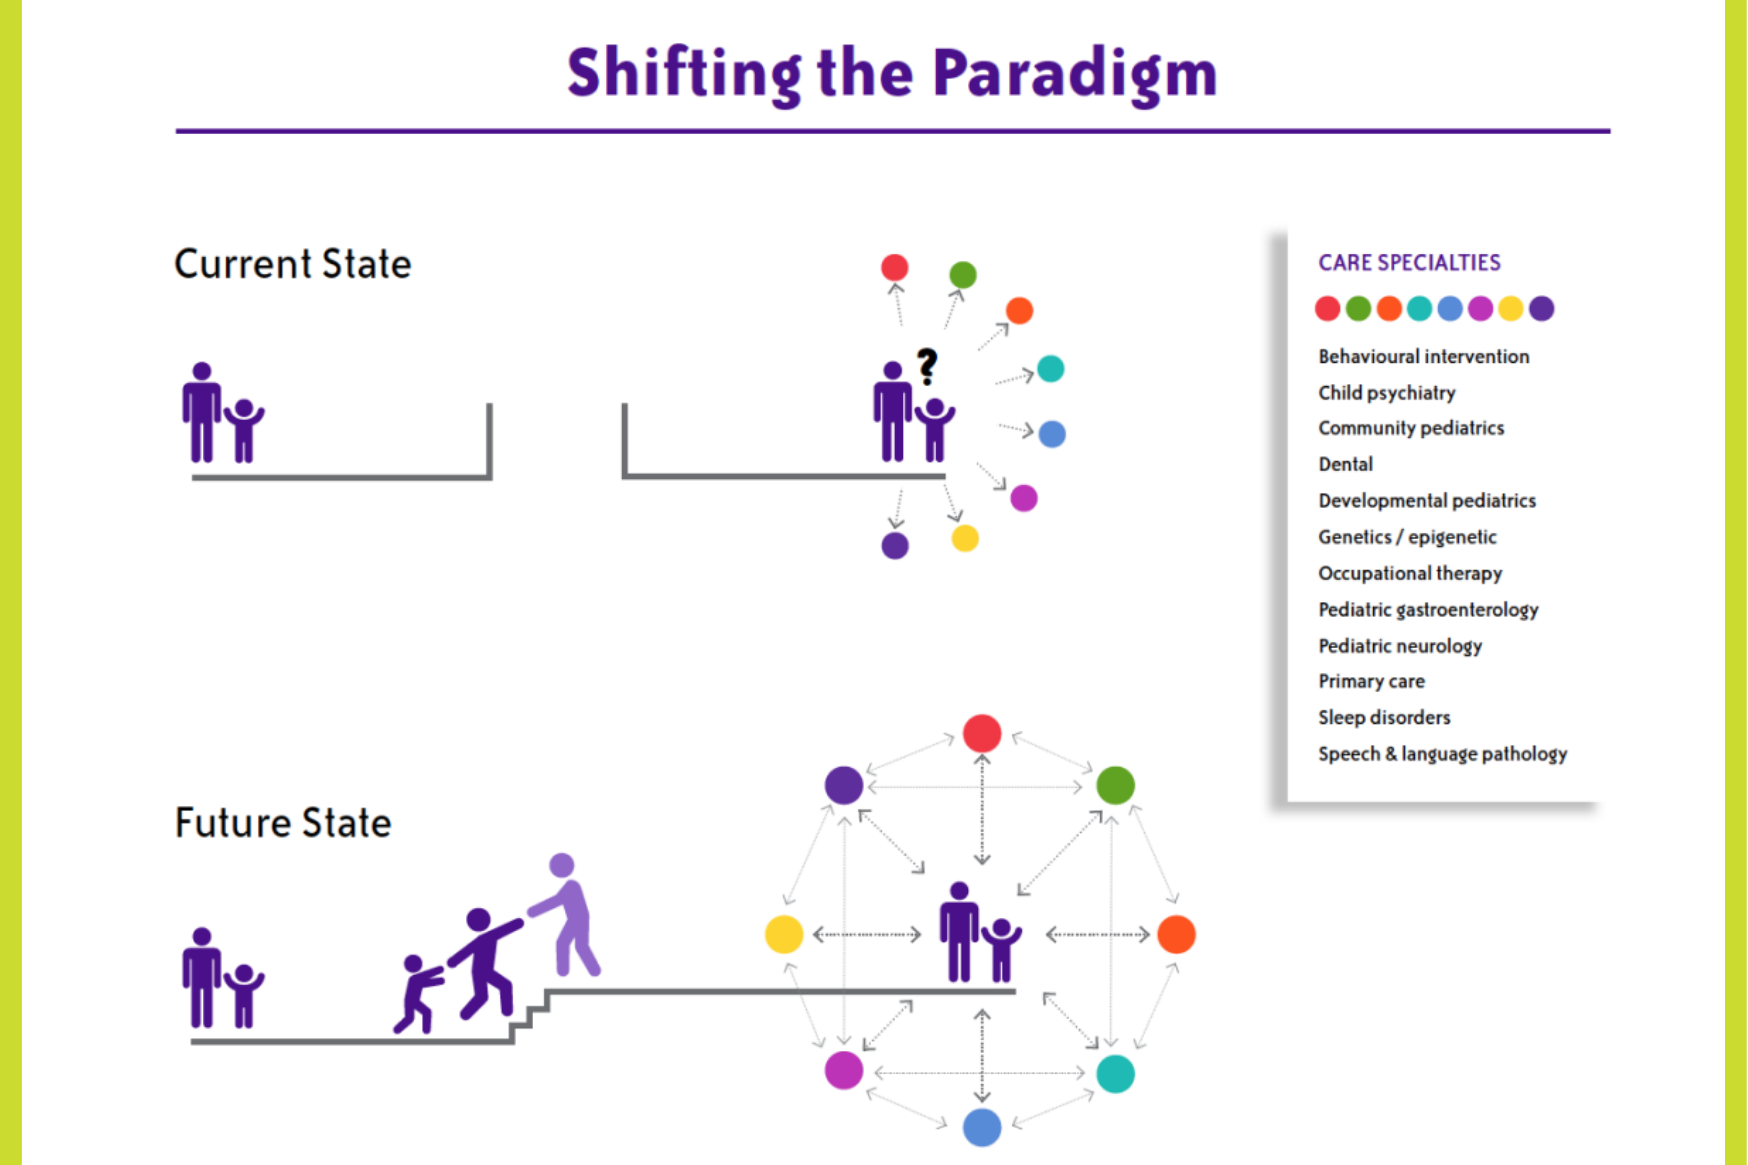 A diagram that shows the current state vs. the future state of the care paradigm.